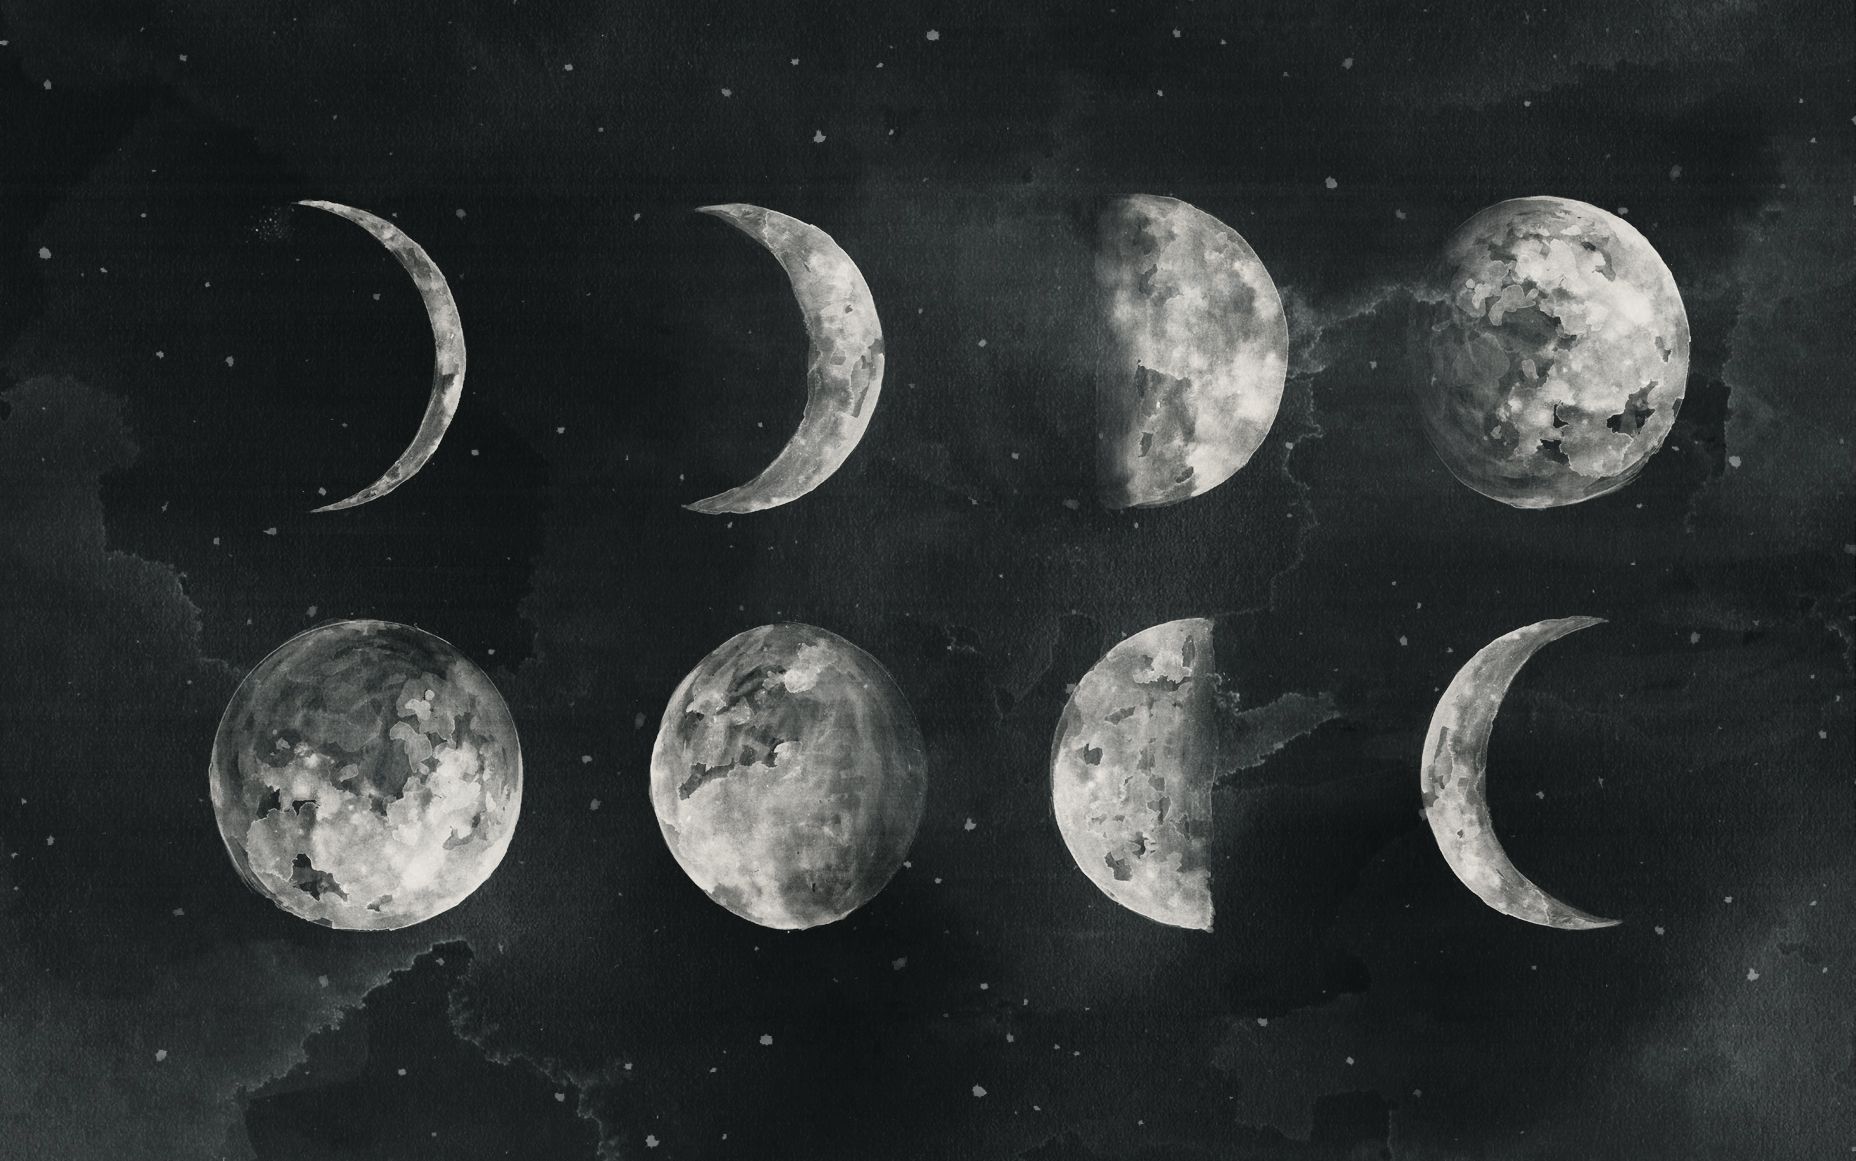 A black and white image of the moon phases - Moon phases